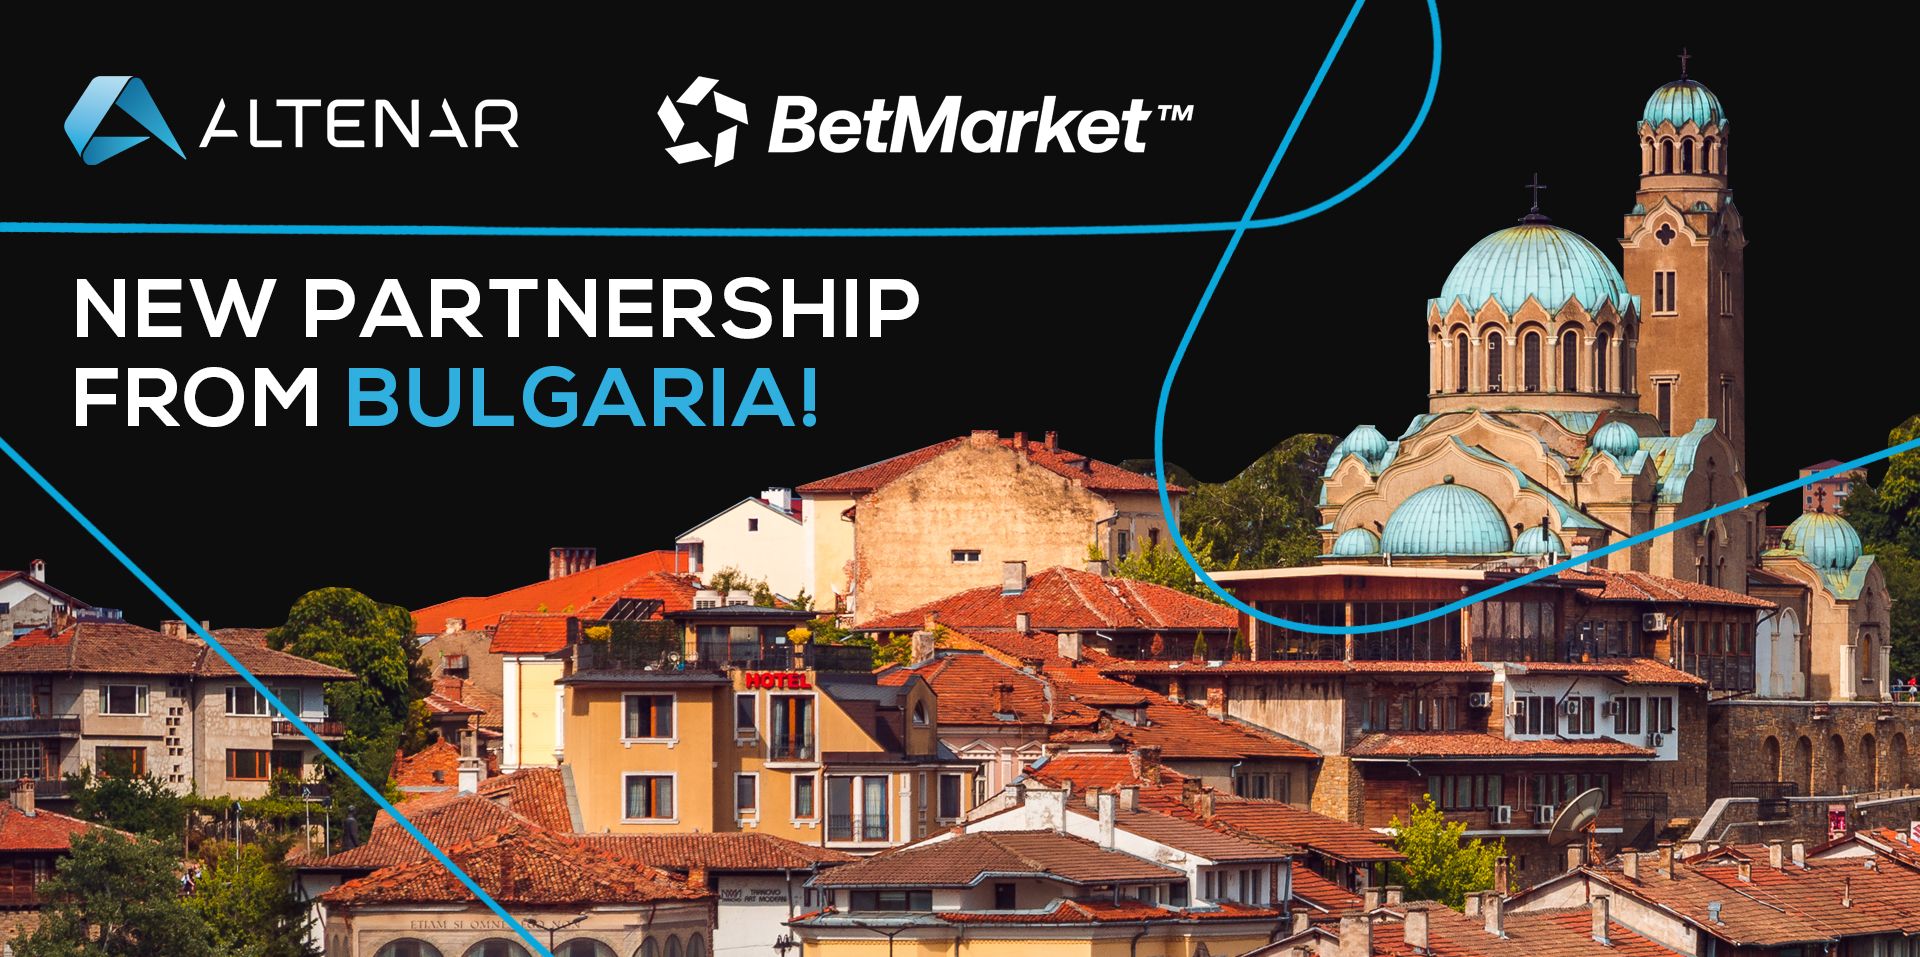 Altenar goes live in Bulgaria with Betmarket Partnership